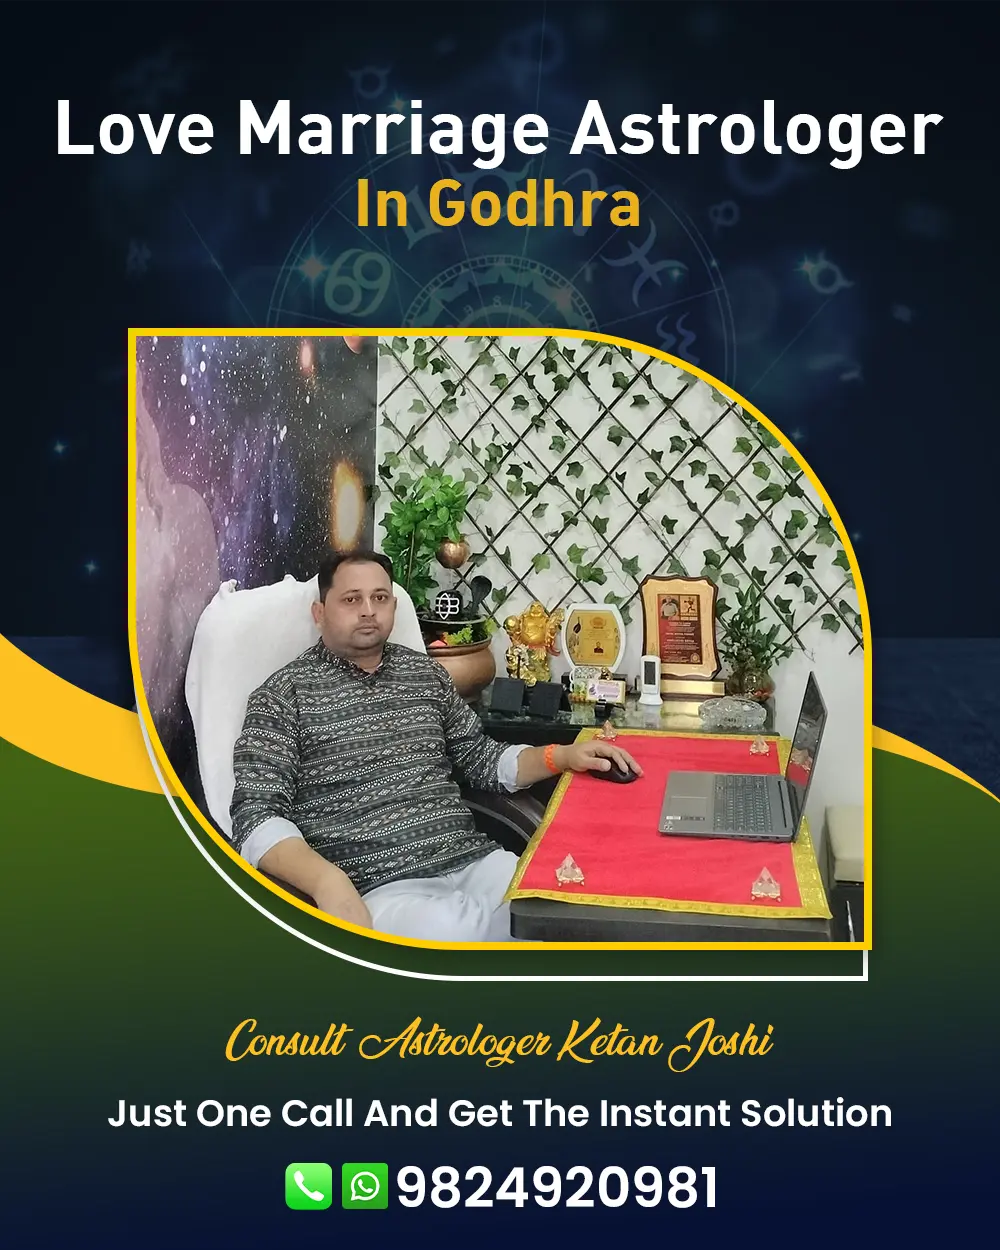 Love Marriage Astrologer In Godhra